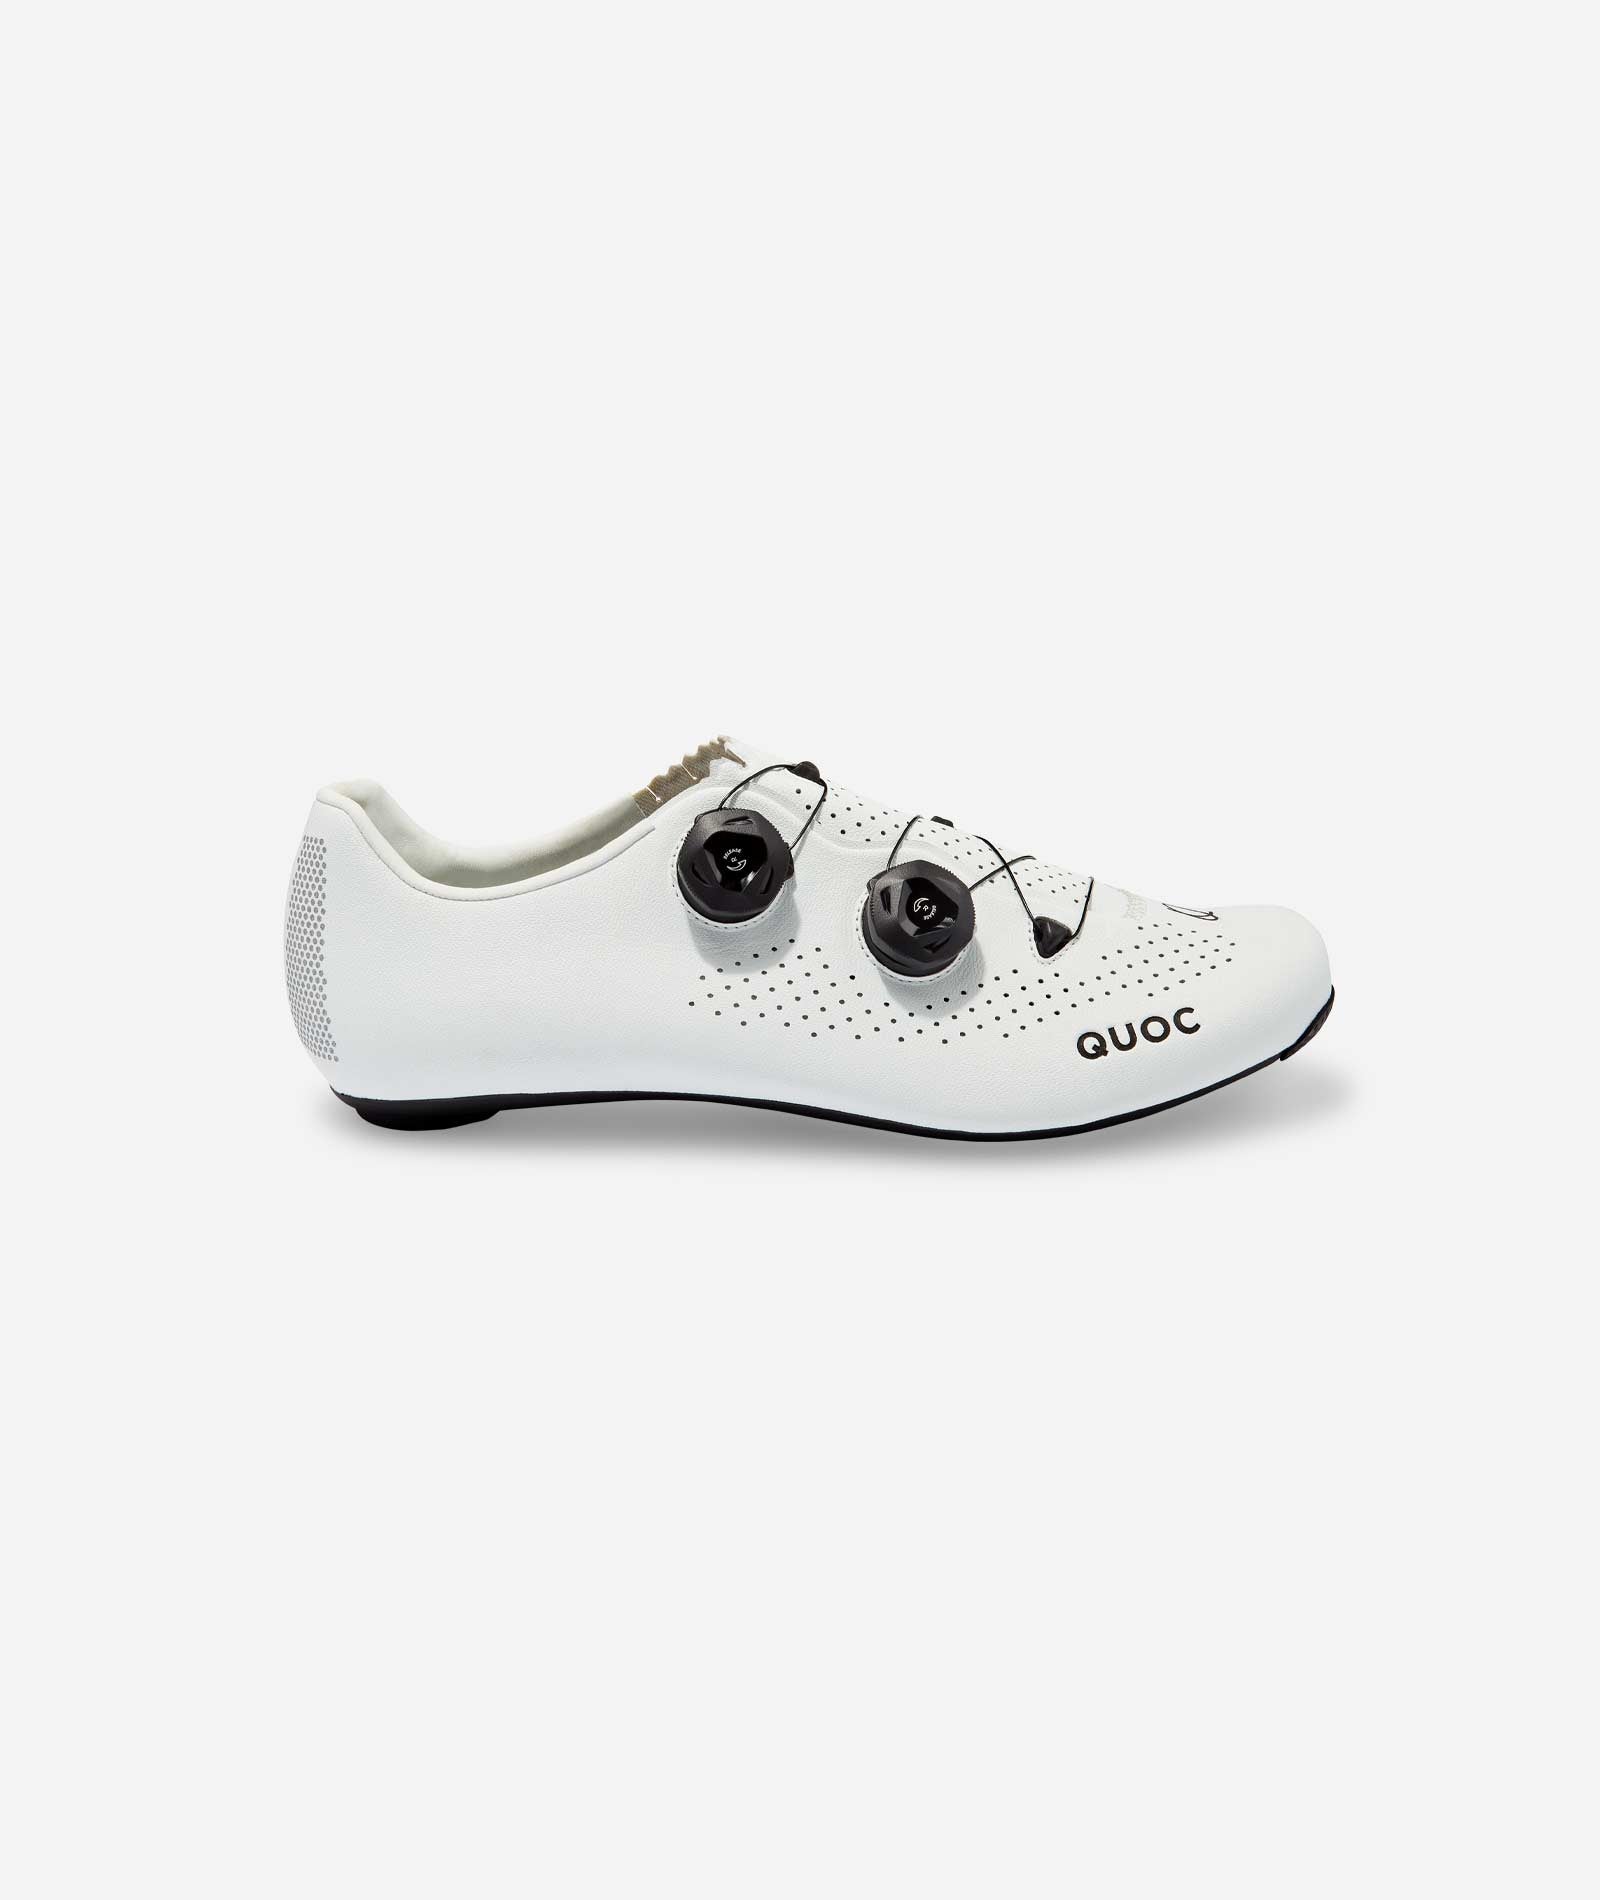 Road Cycling Shoes QUOC